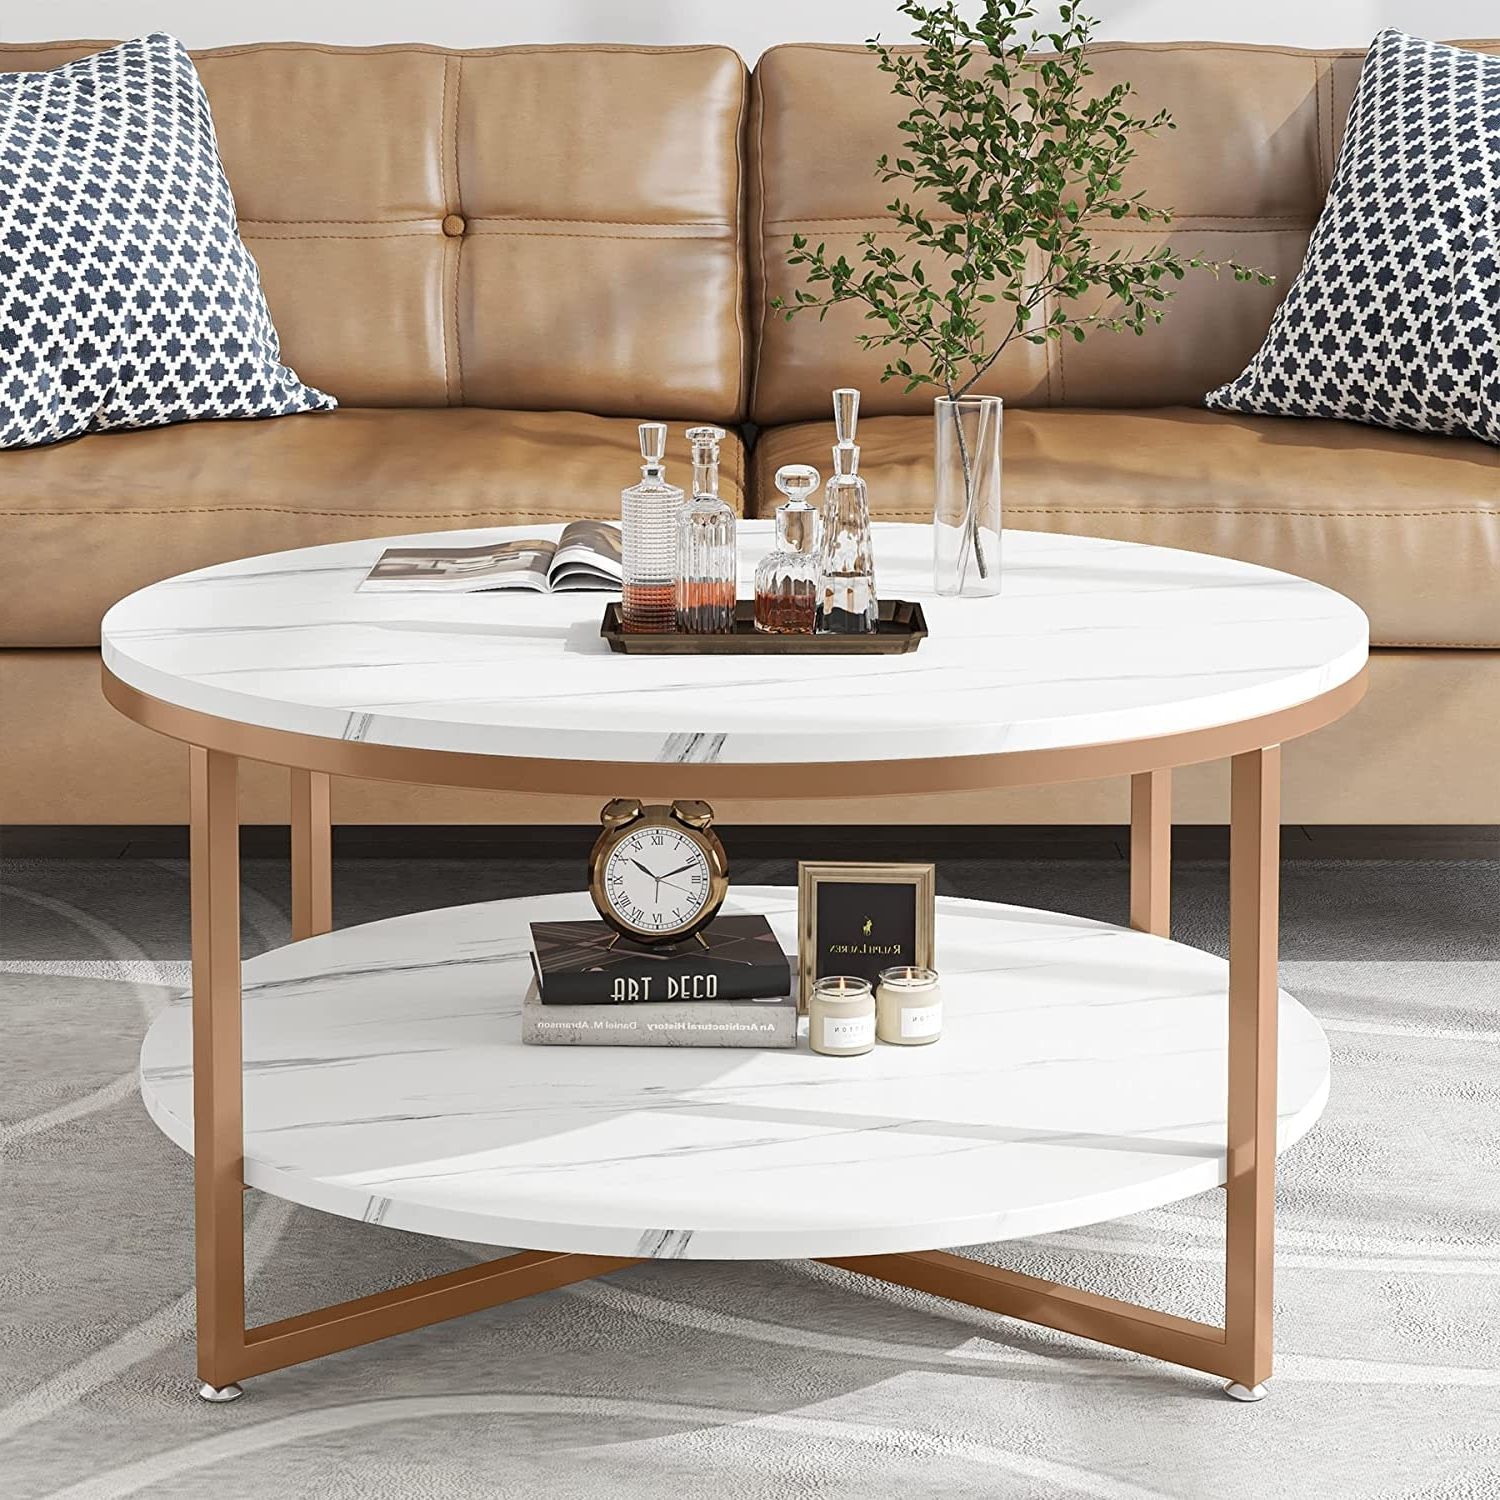 Trendy Two Tier Round Faux Marble Modern Coffee Table With Metal Legs And Open  Storage Shelf For Living Room, White Gold – Bed Bath & Beyond – 37593828 With Regard To Modern Round Faux Marble Coffee Tables (View 2 of 10)